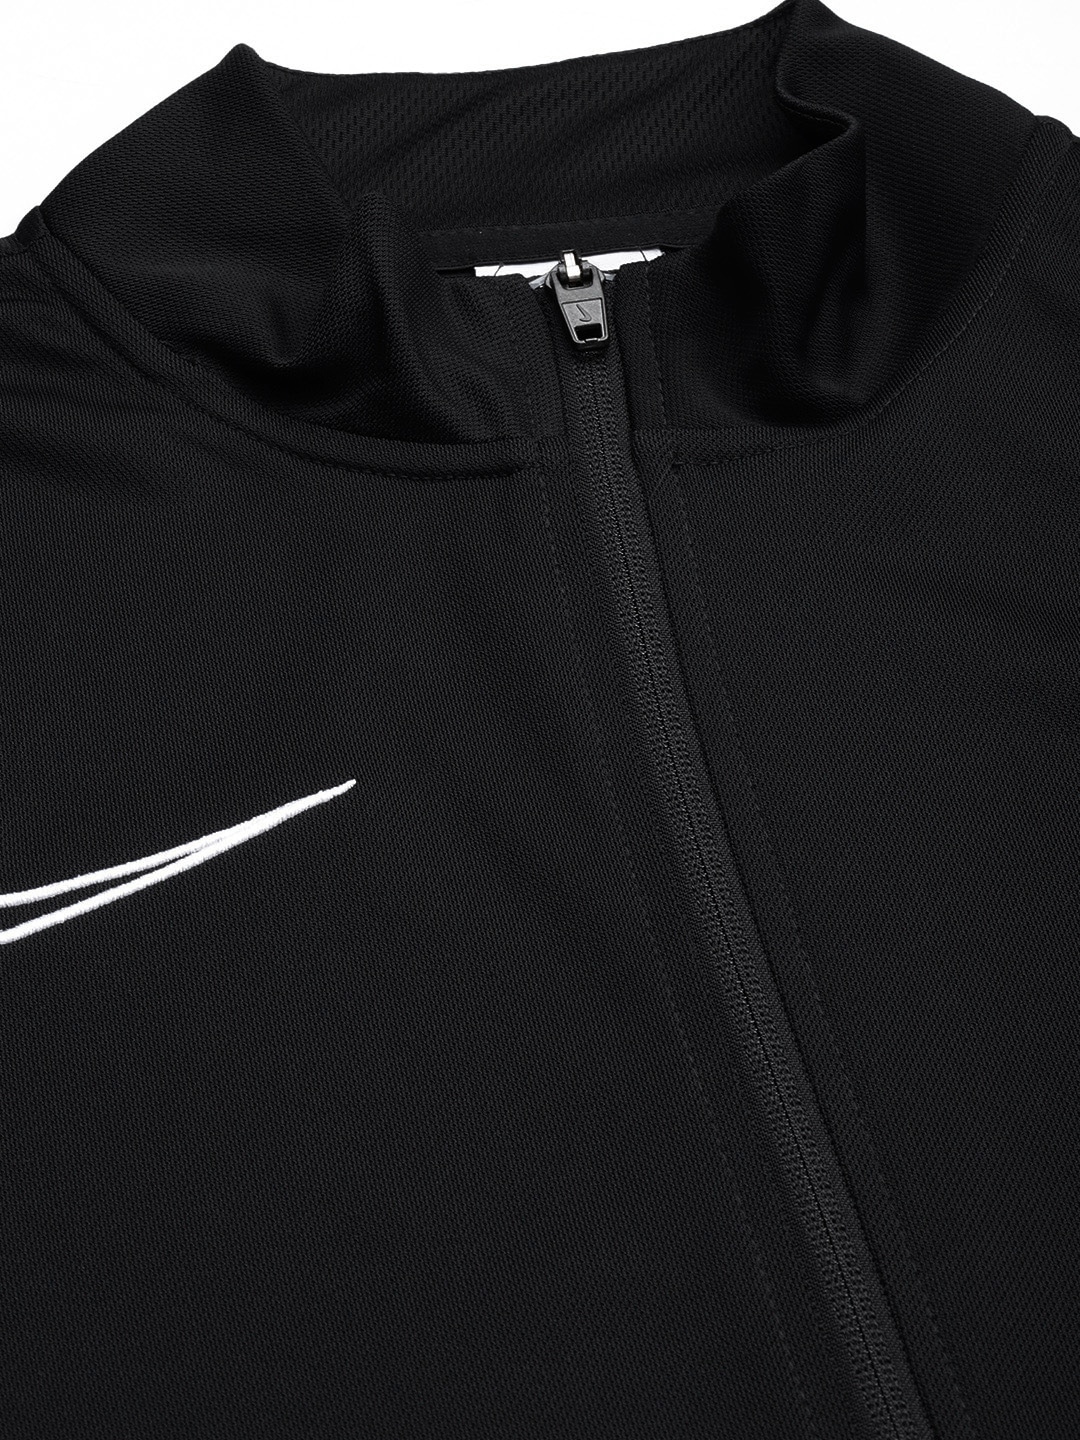 Clothing Tracksuits | Nike Men Black Brand Logo Embroidered Dri-FIT Knit Soccer Tracksuit - EI09176